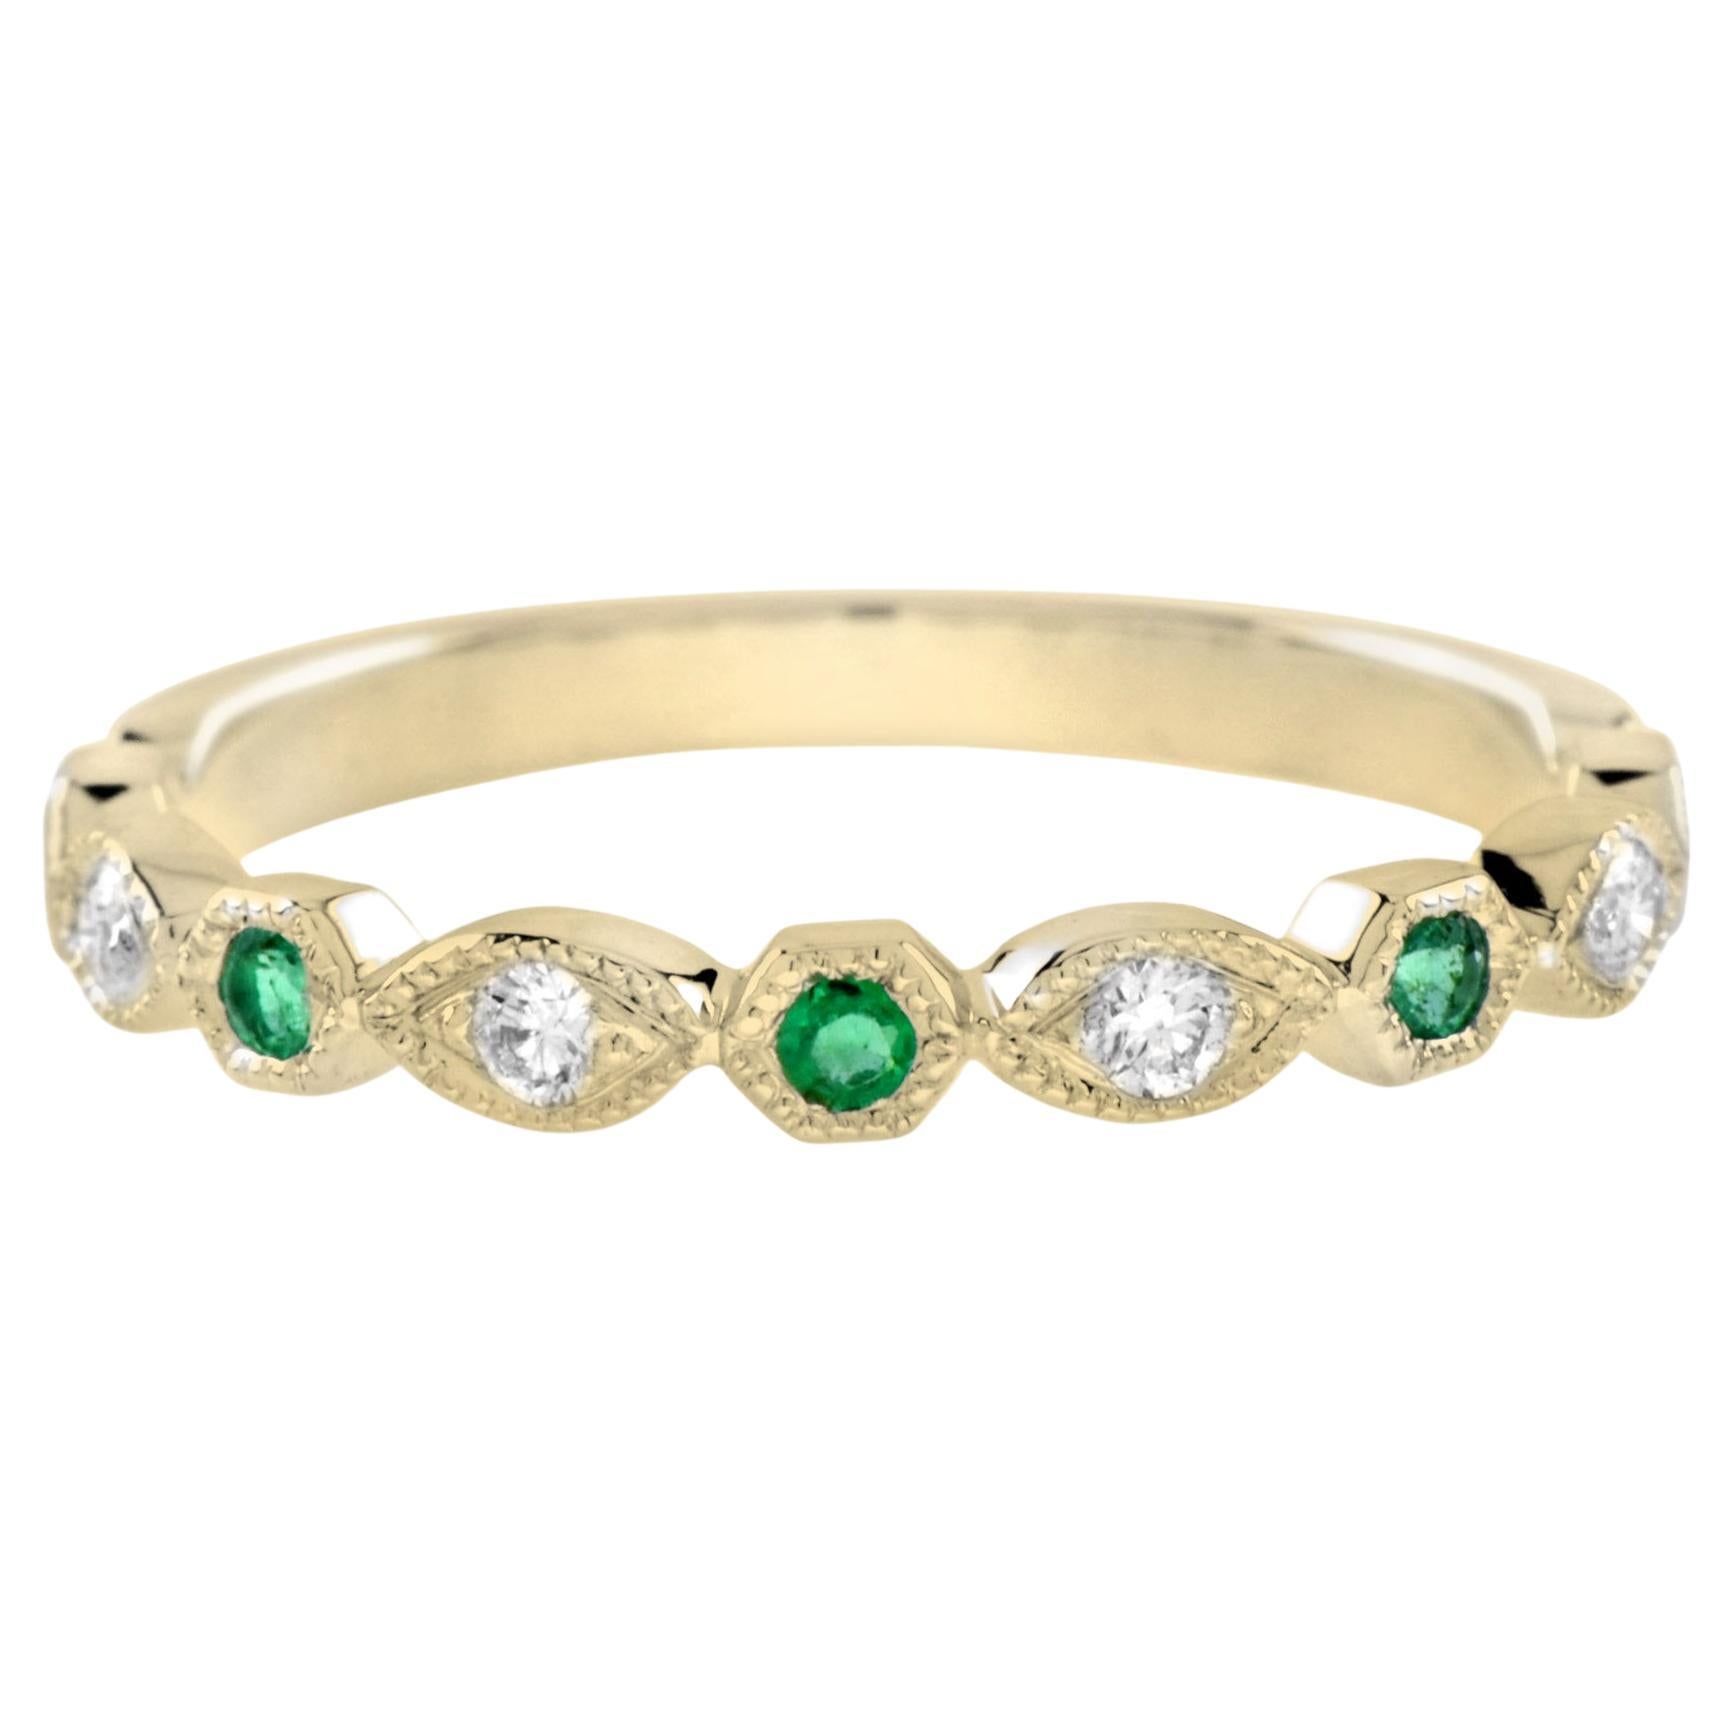 For Sale:  Emerald and Diamond Vintage Style Half Eternity Band Ring in 14K Yellow Gold